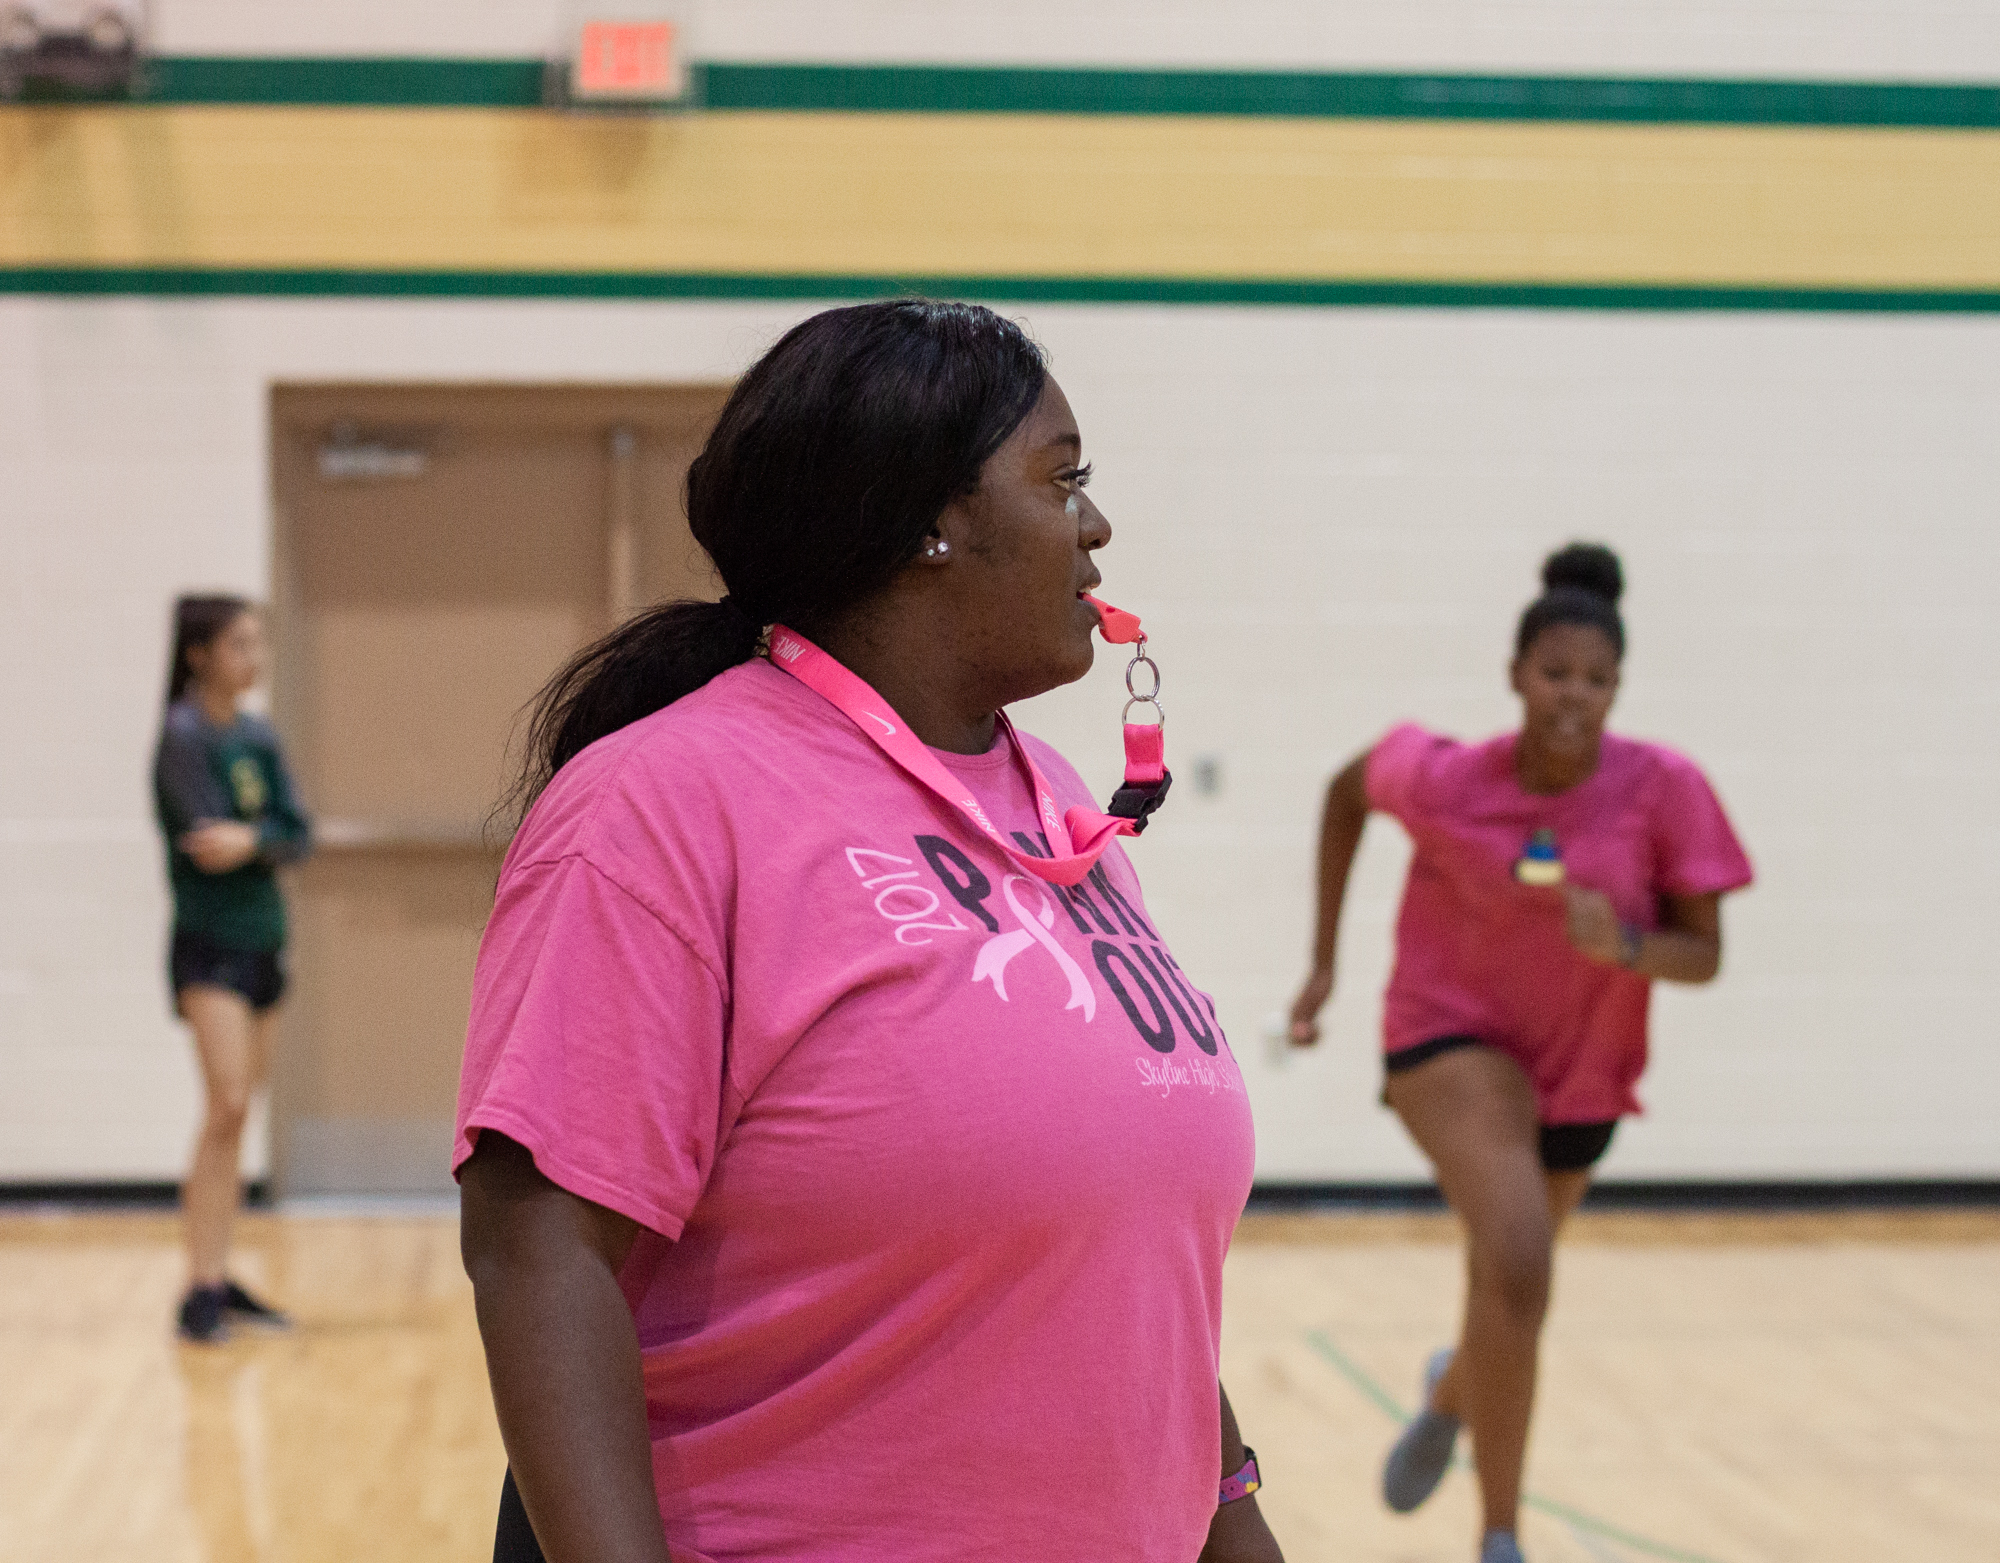  Chiniqua Bright looks on as her students participate in a relay race on Oct. 3, 2018. She said the lack of racial and gender diversity in gym teachers was one reason she pursued a career in the field. “I wondered, ‘where are all the girls?’” she rec